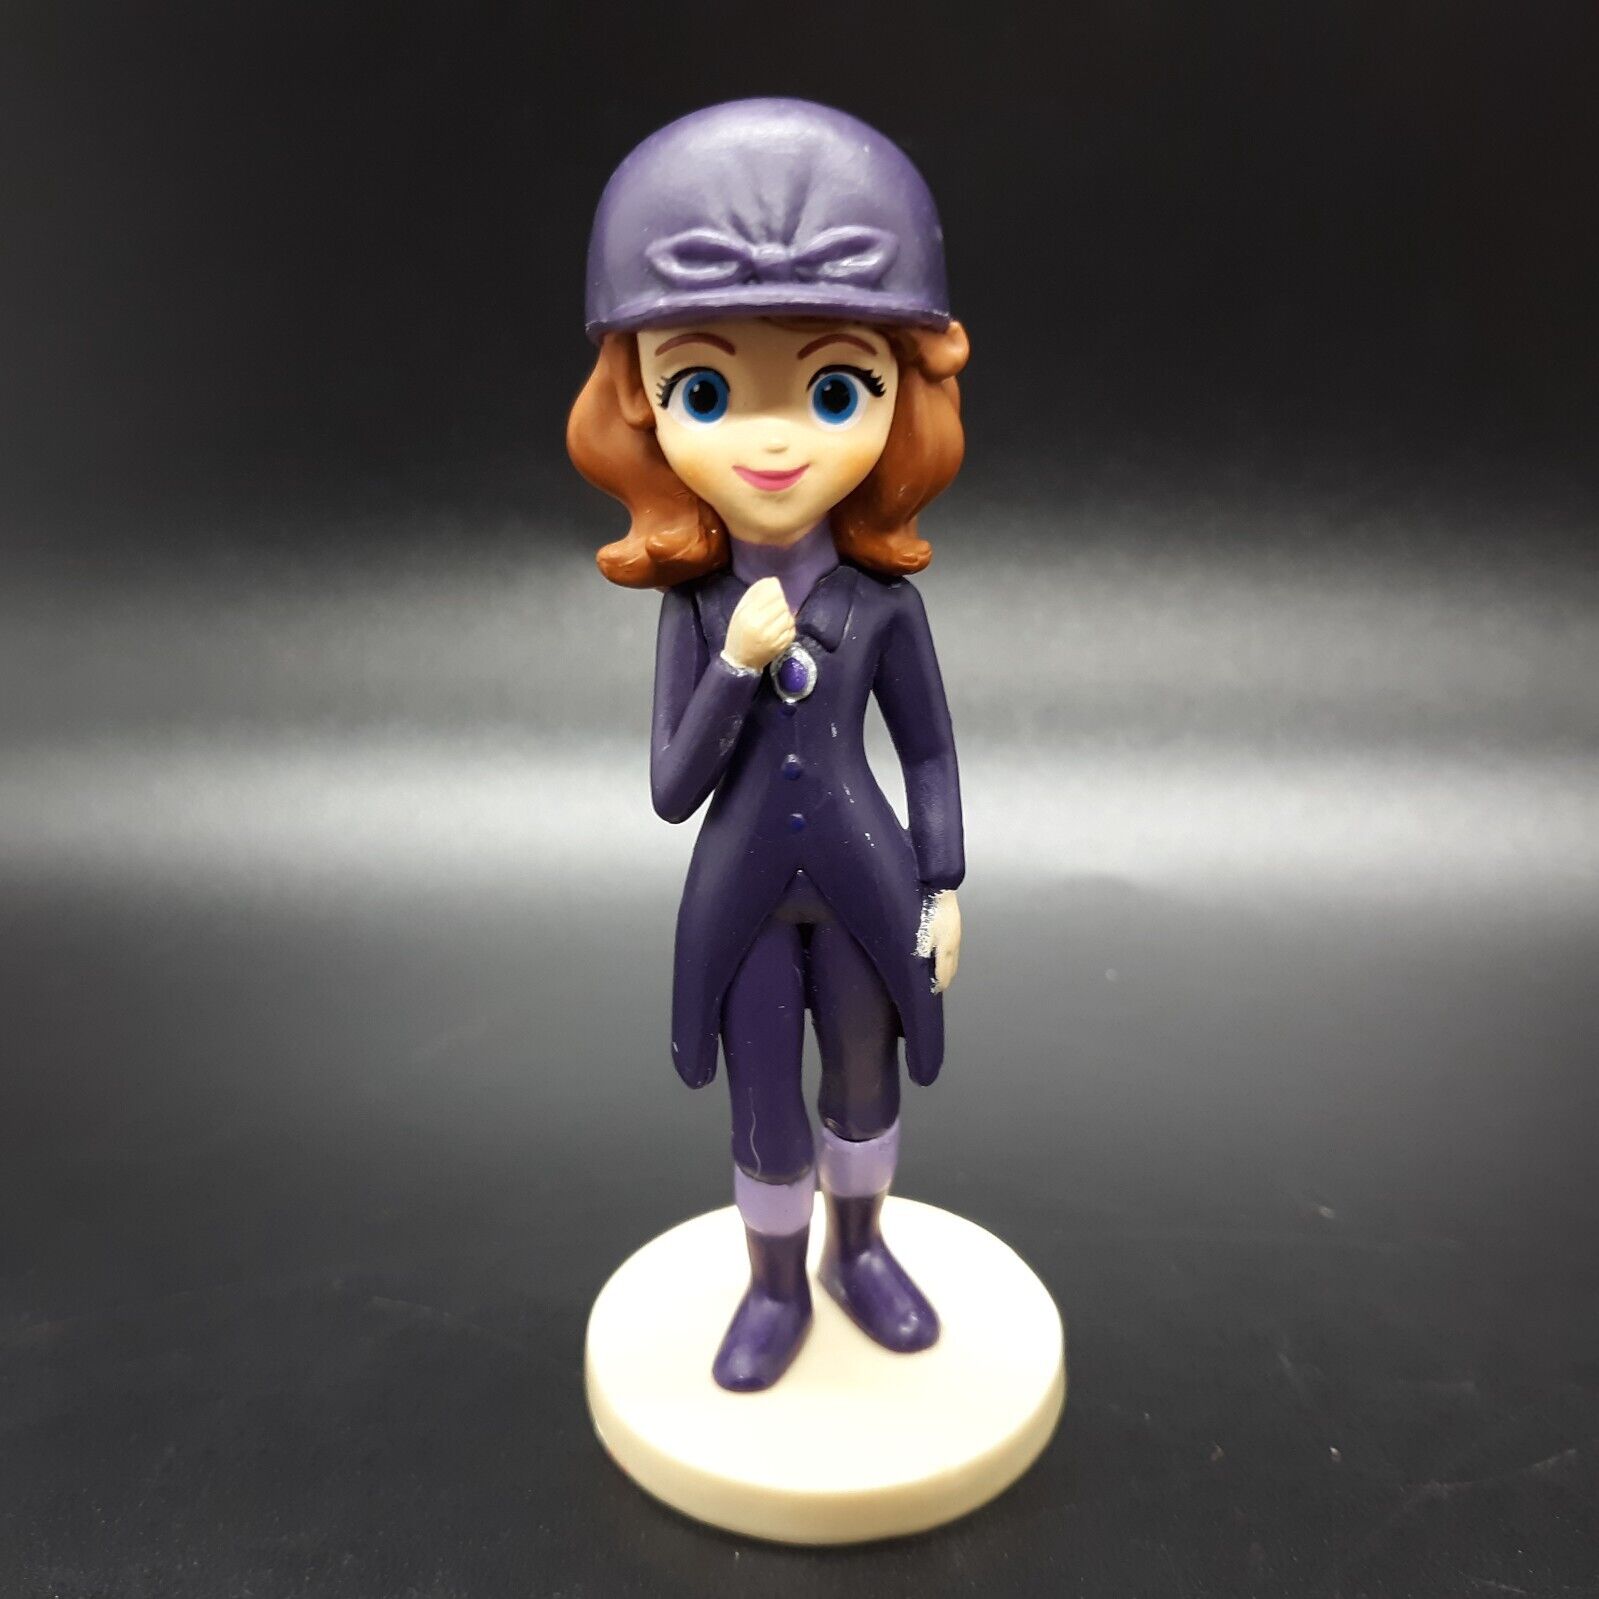 Rare Sofia The First Horse Horseback Riding 2.5 Inch PVC Toy Figure Doll